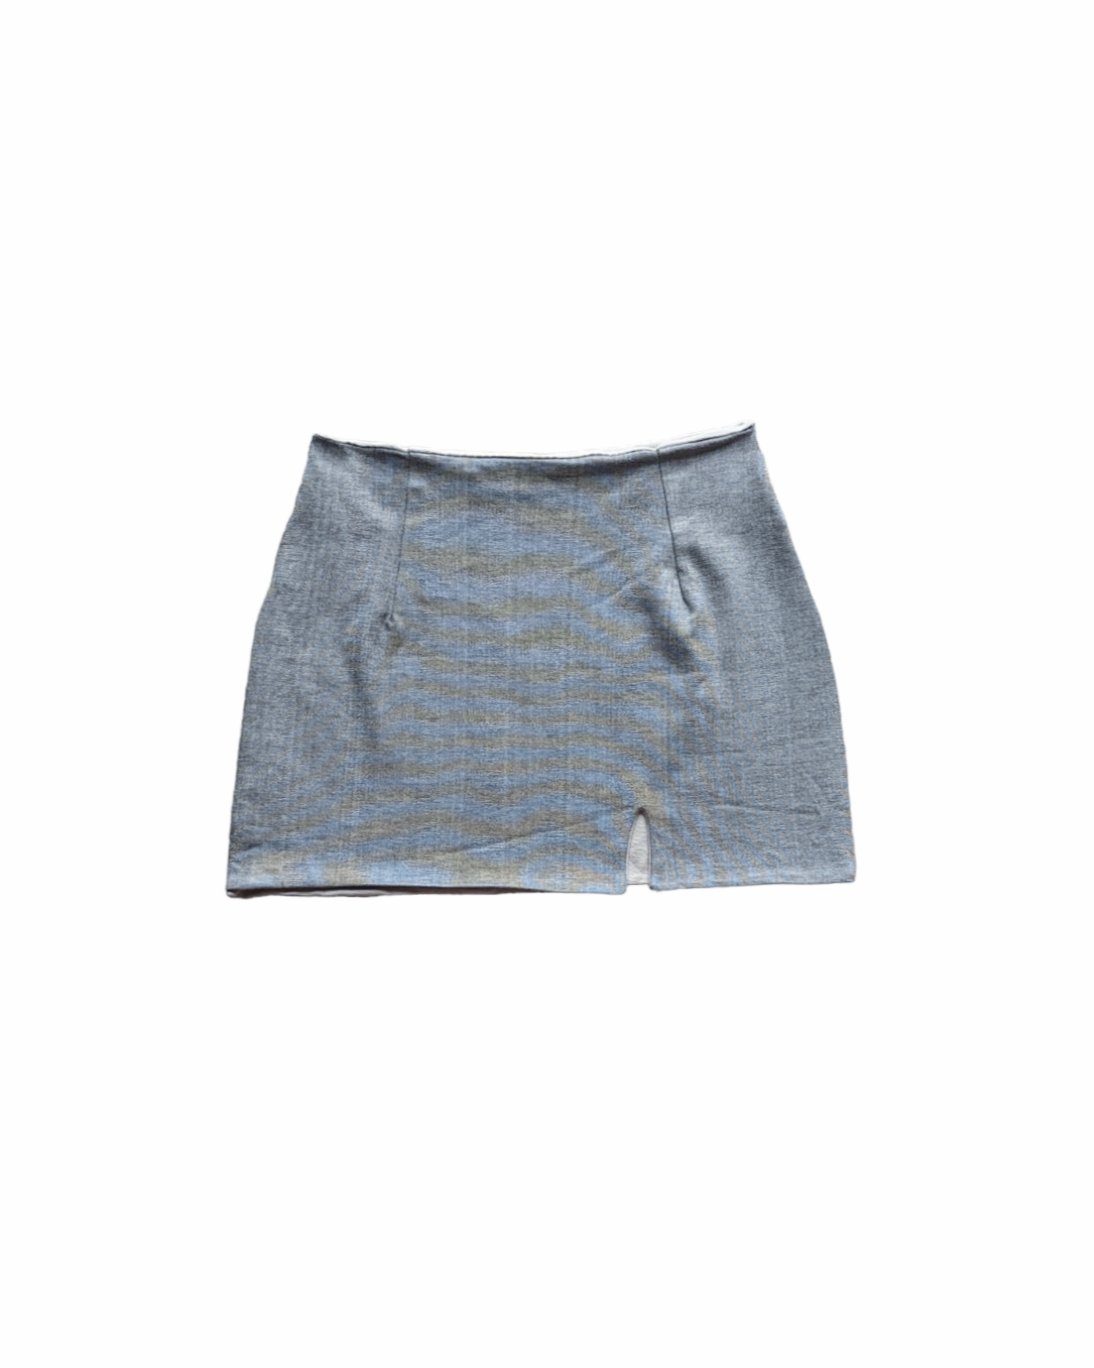 Image of CATCALL: THE REVERSIBLE MINI SKIRT in STONE